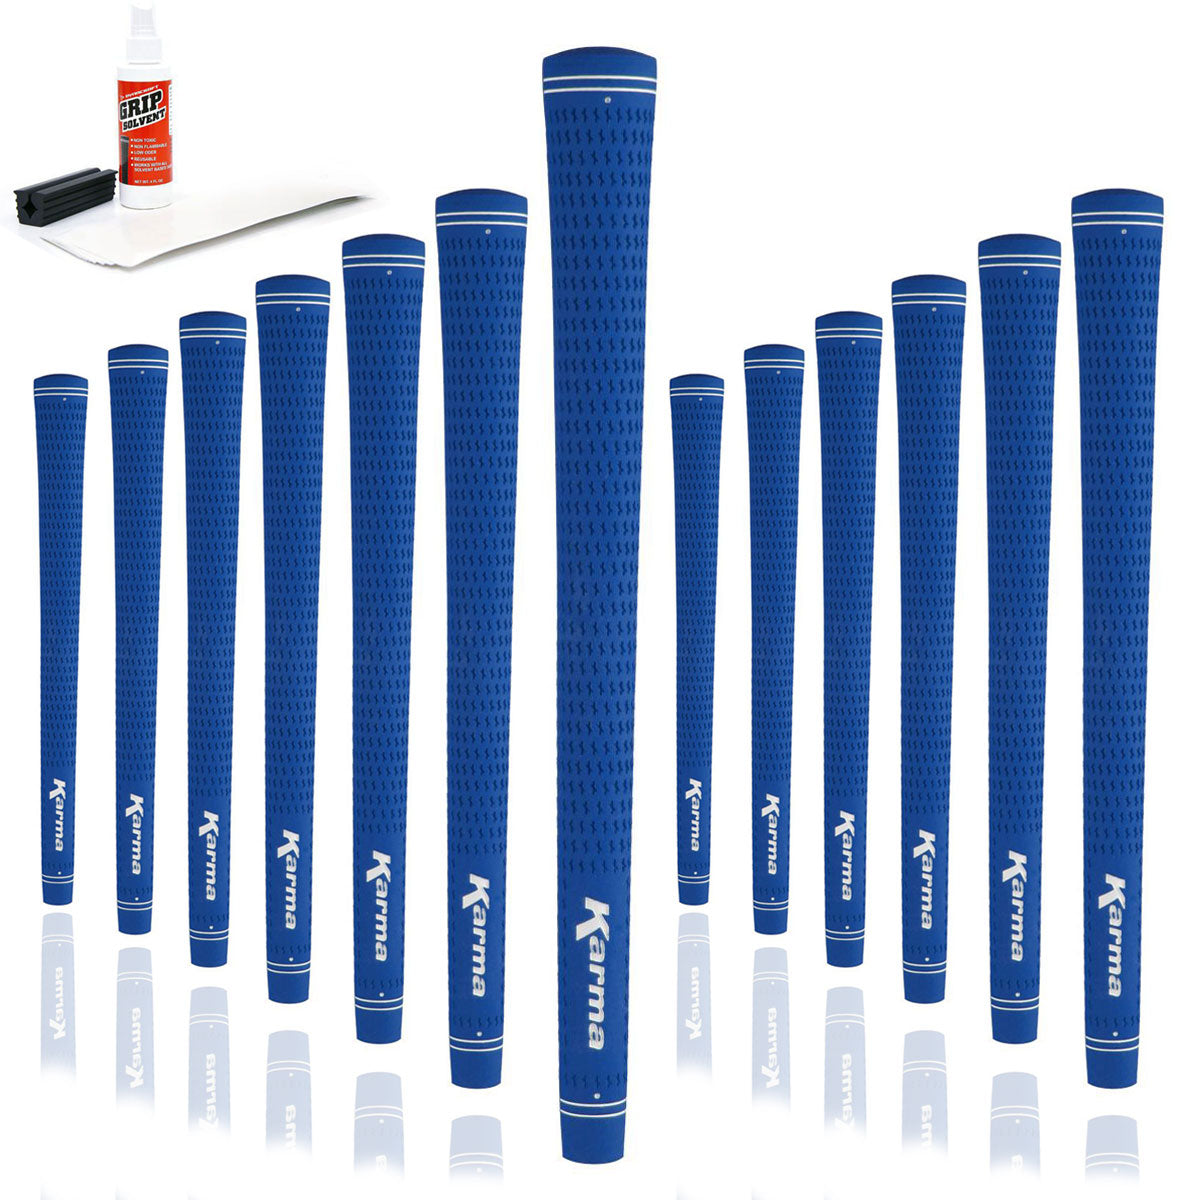 13 Karma Velour Blue golf grips, golf grip tape strips, bottle of grip solvent and rubber shaft clamp